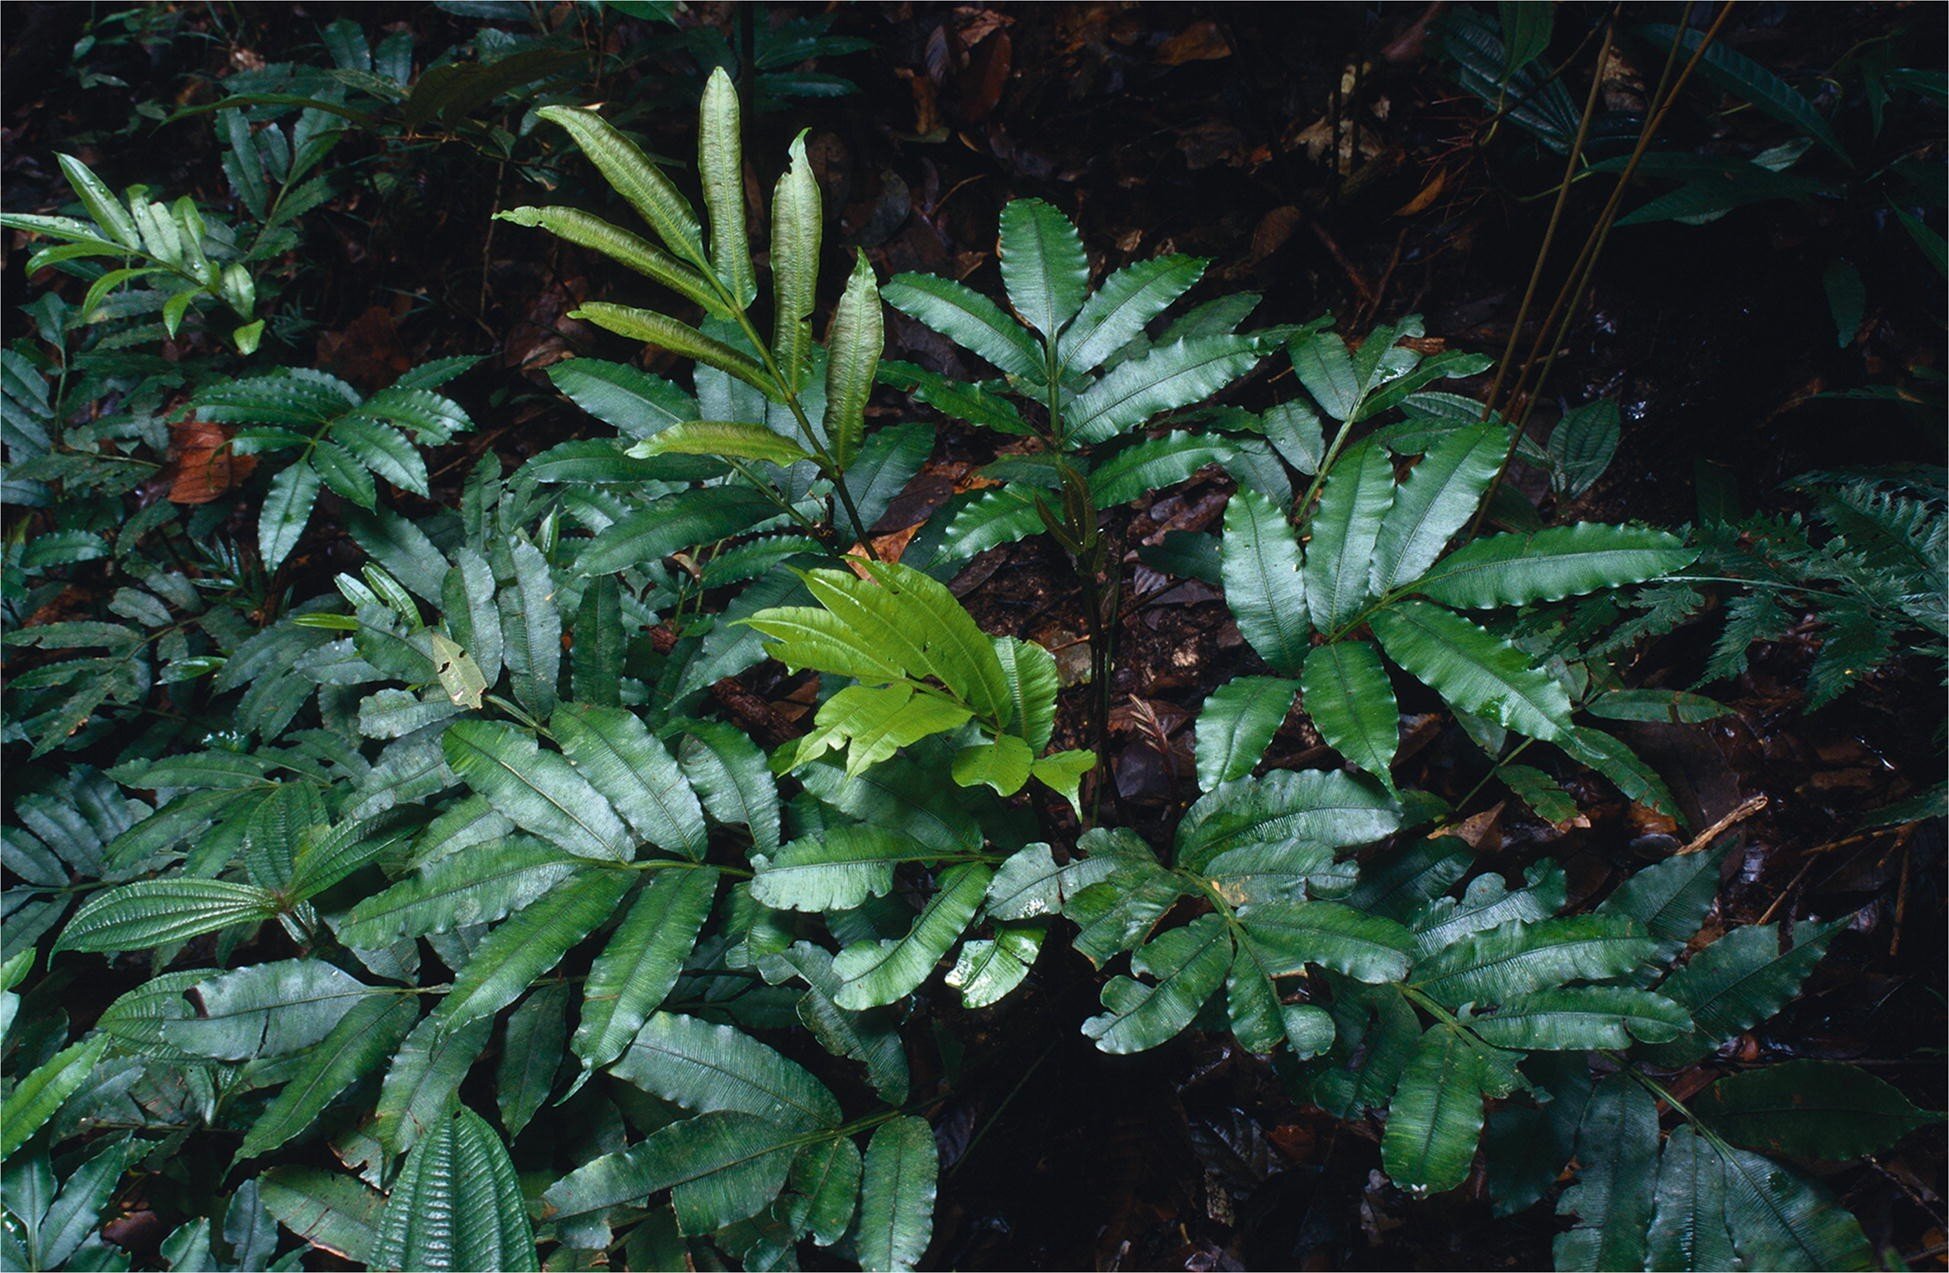 Hidden in plain sight: Seven new species of showy tropical forest ferns